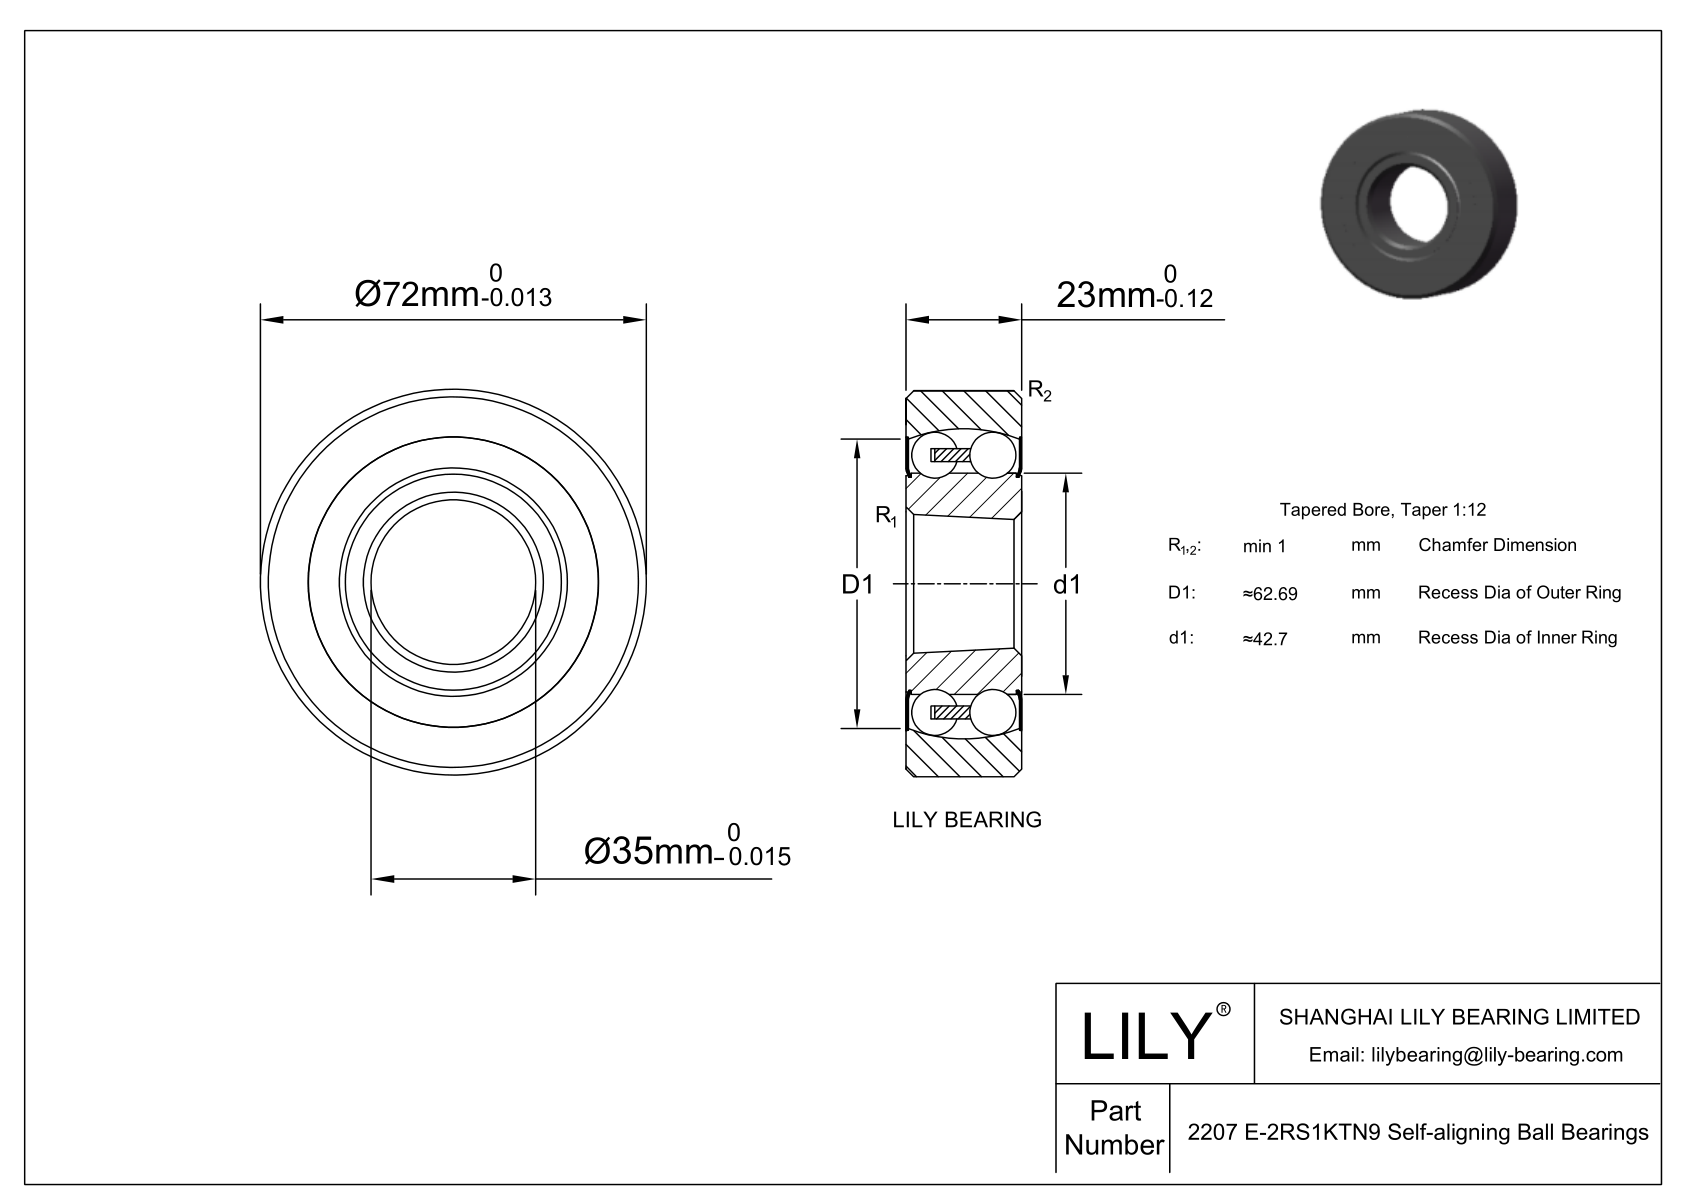 S2207 E-2RS1KTN9 Stainless Steel Self Aligning Ball Bearings cad drawing